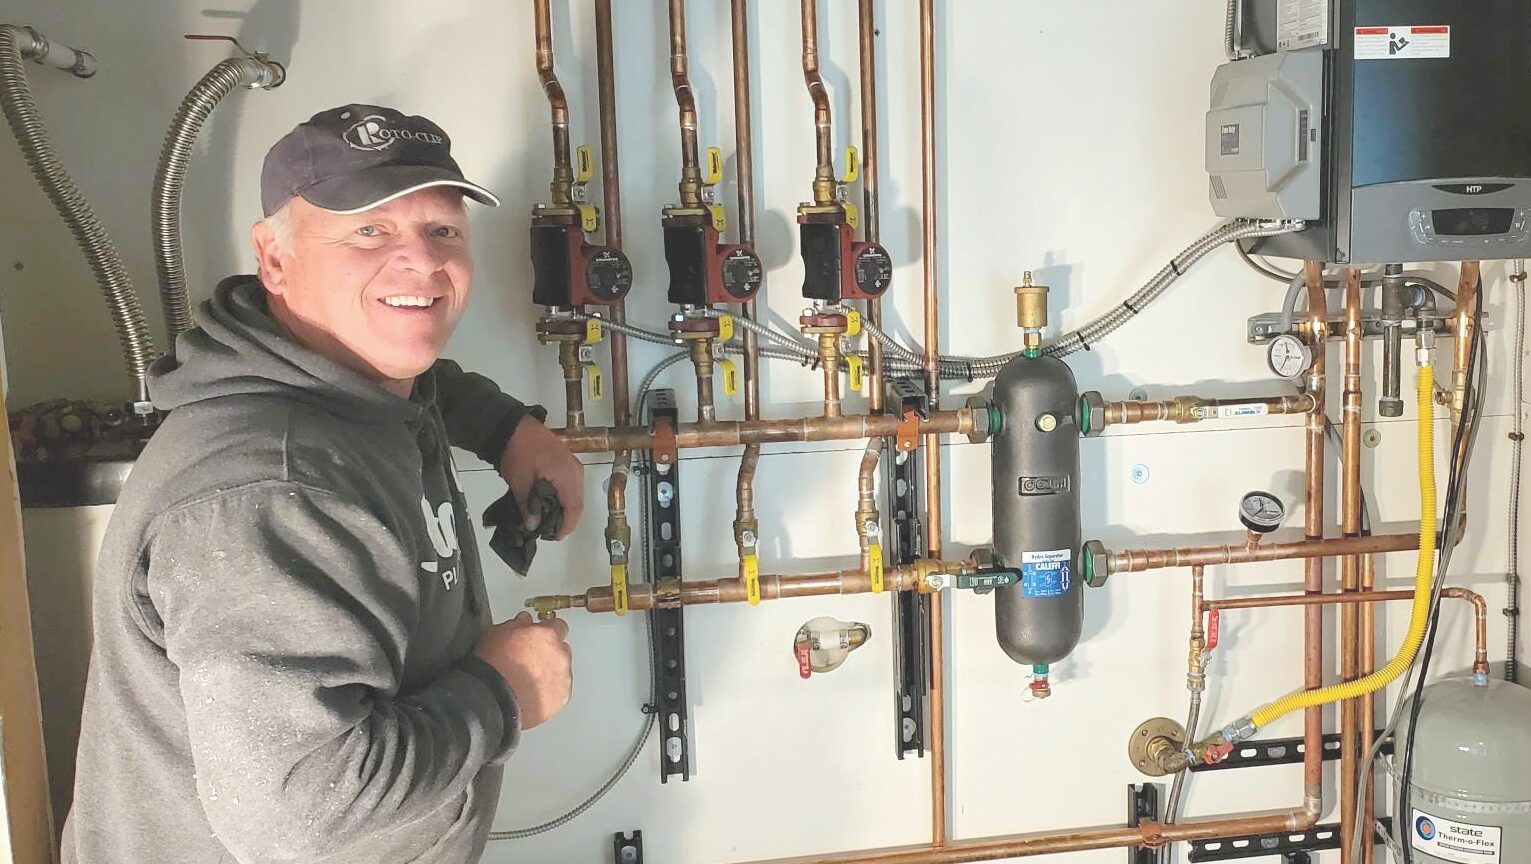 man installing a manifold for heating system